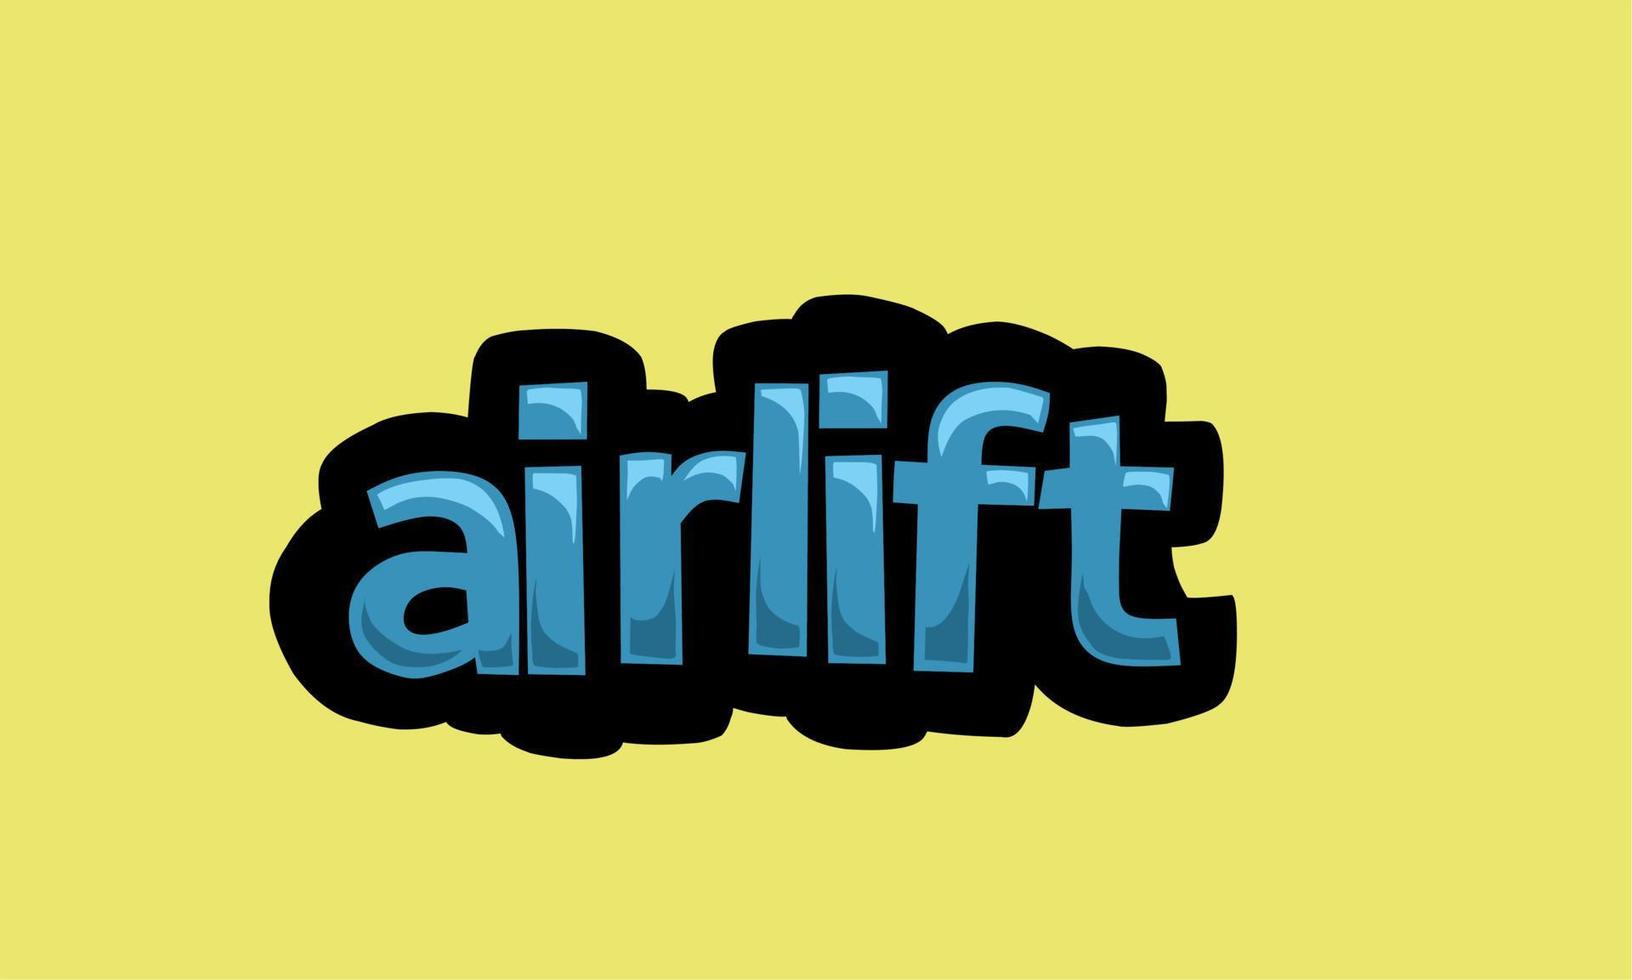 AIR LIFT writing vector design on a yellow background